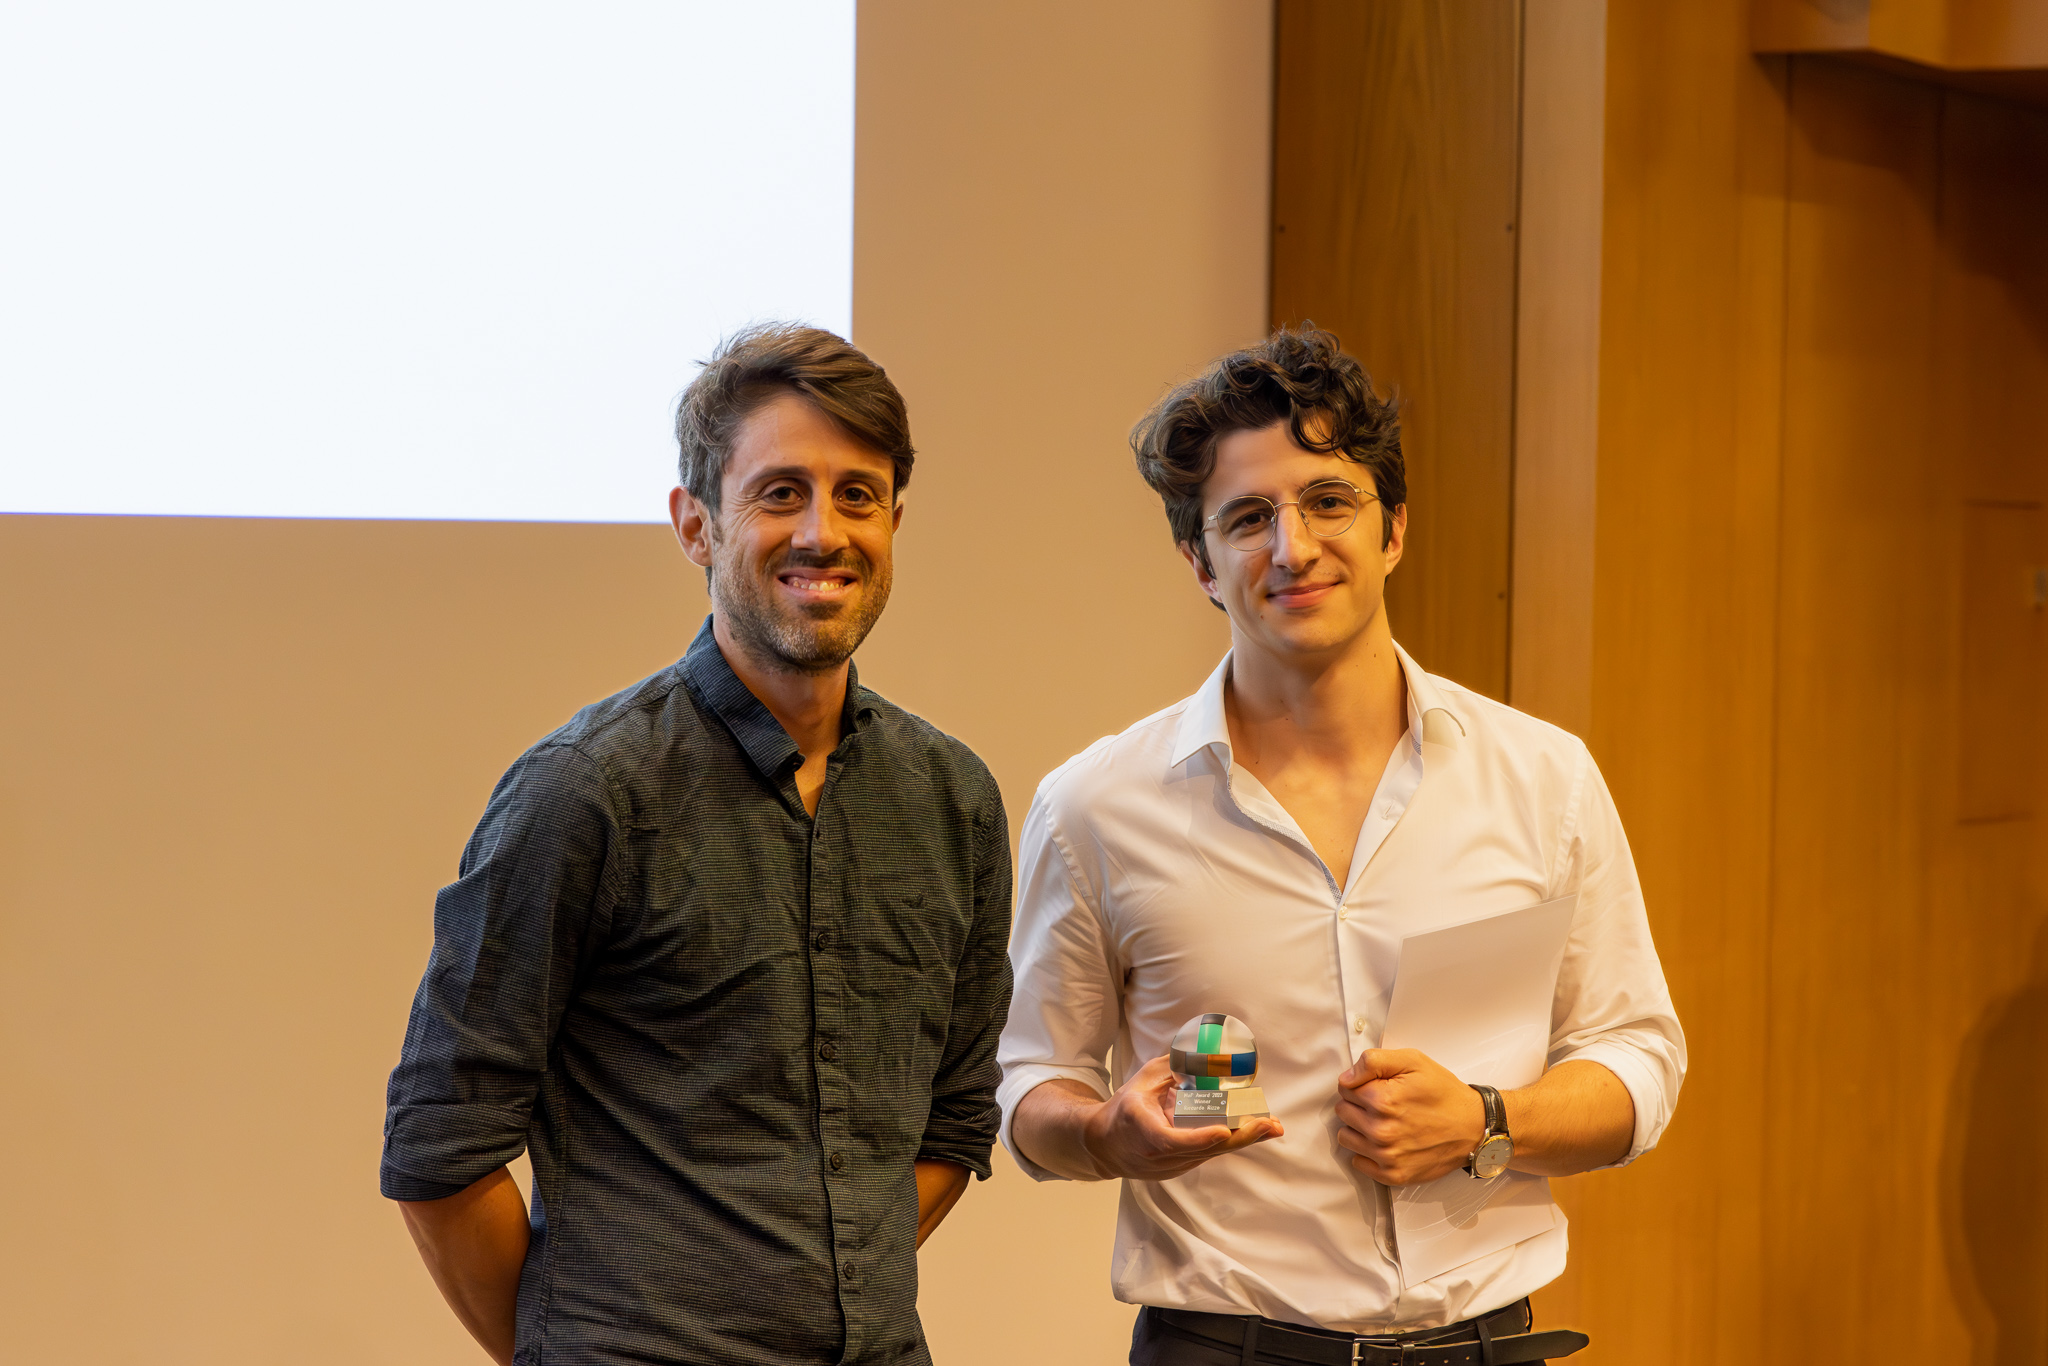 Prof. Lucio Isa and Dr. Riccardo Rizzo, Winner MaP Award 2023. Riccardo Rizzo holding the MaP Award puzzle ball.